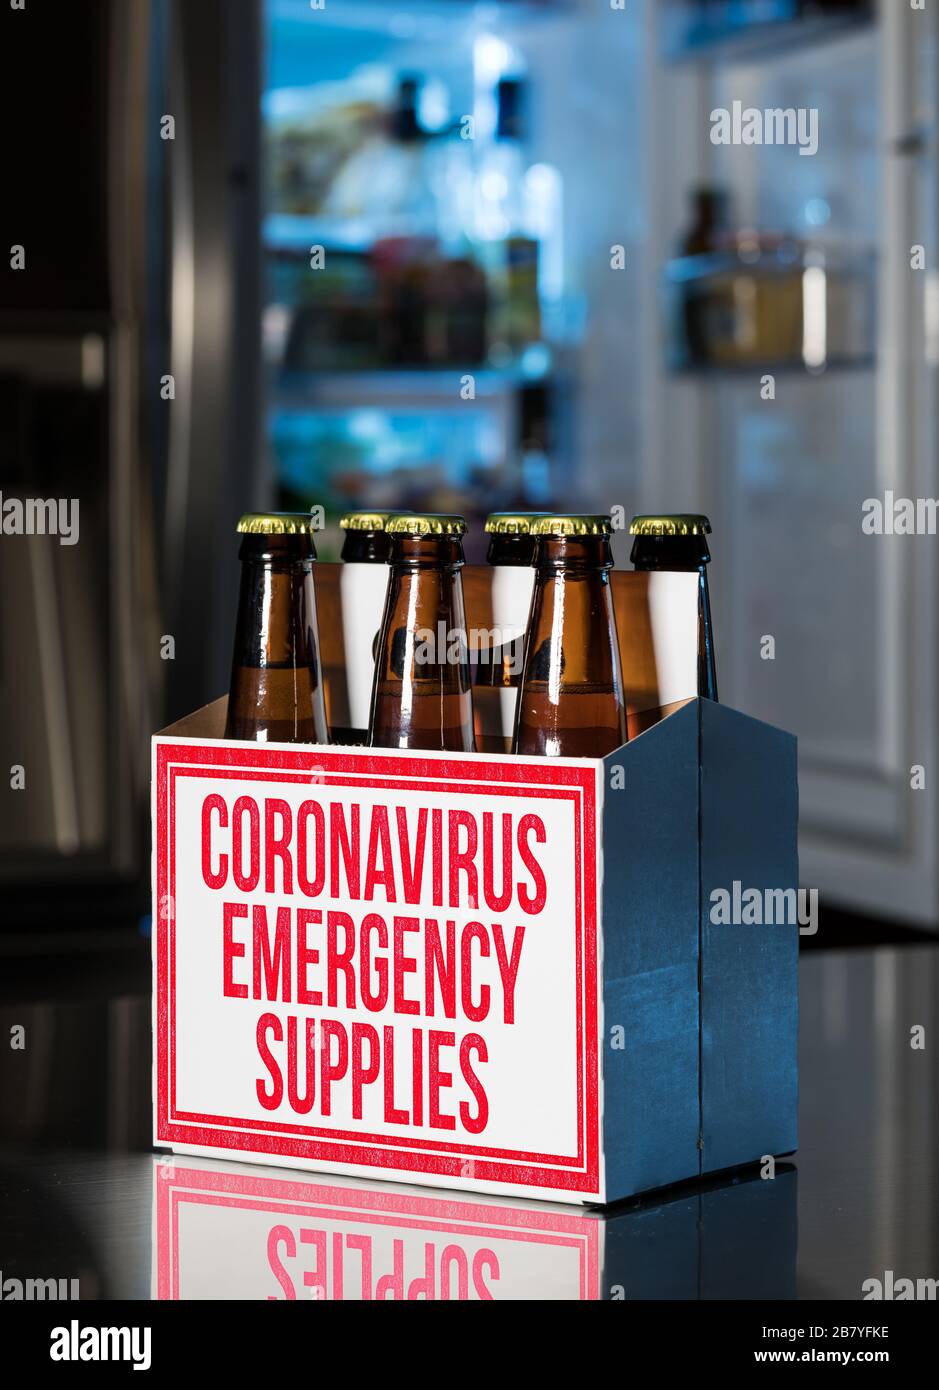 Six pack of brown beer bottles in box with Coronavirus Emergency Supplies stamped on side. Cold fridge out of focus in rear. Humorous view of hoarding Stock Photo